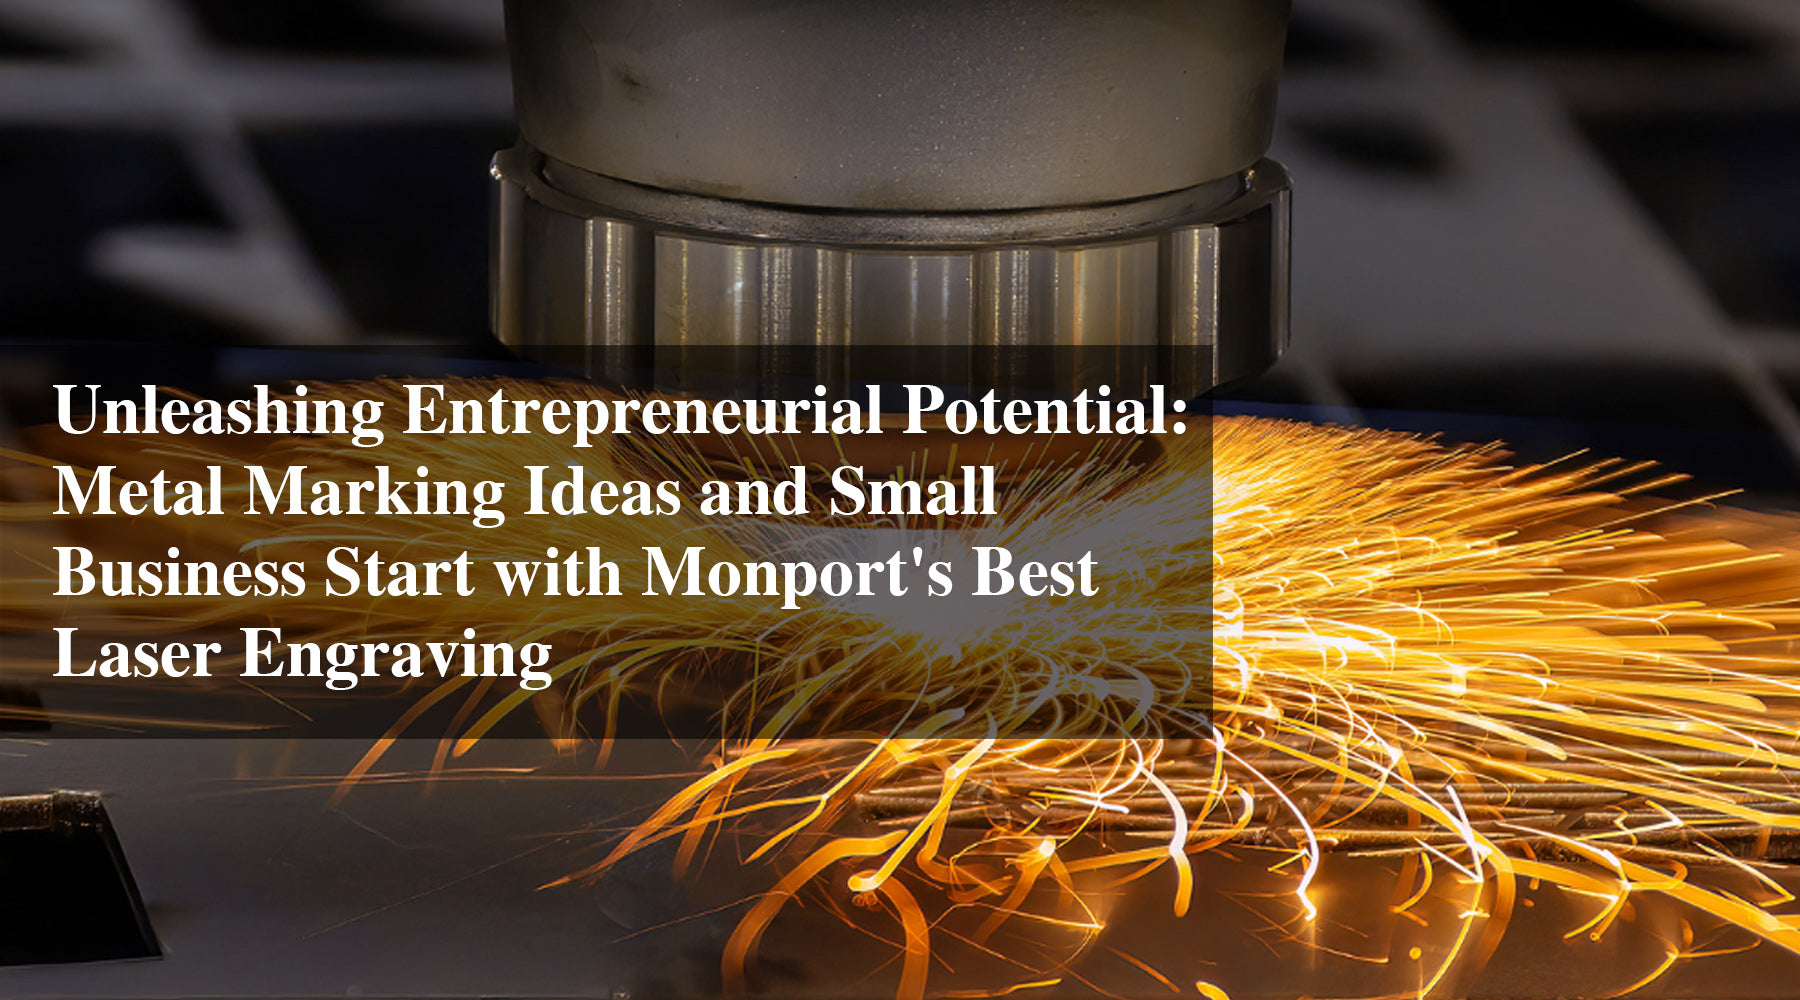 Unleashing Entrepreneurial Potential: Metal Marking Ideas and Small Business Start with Monport's Best Laser Engraving